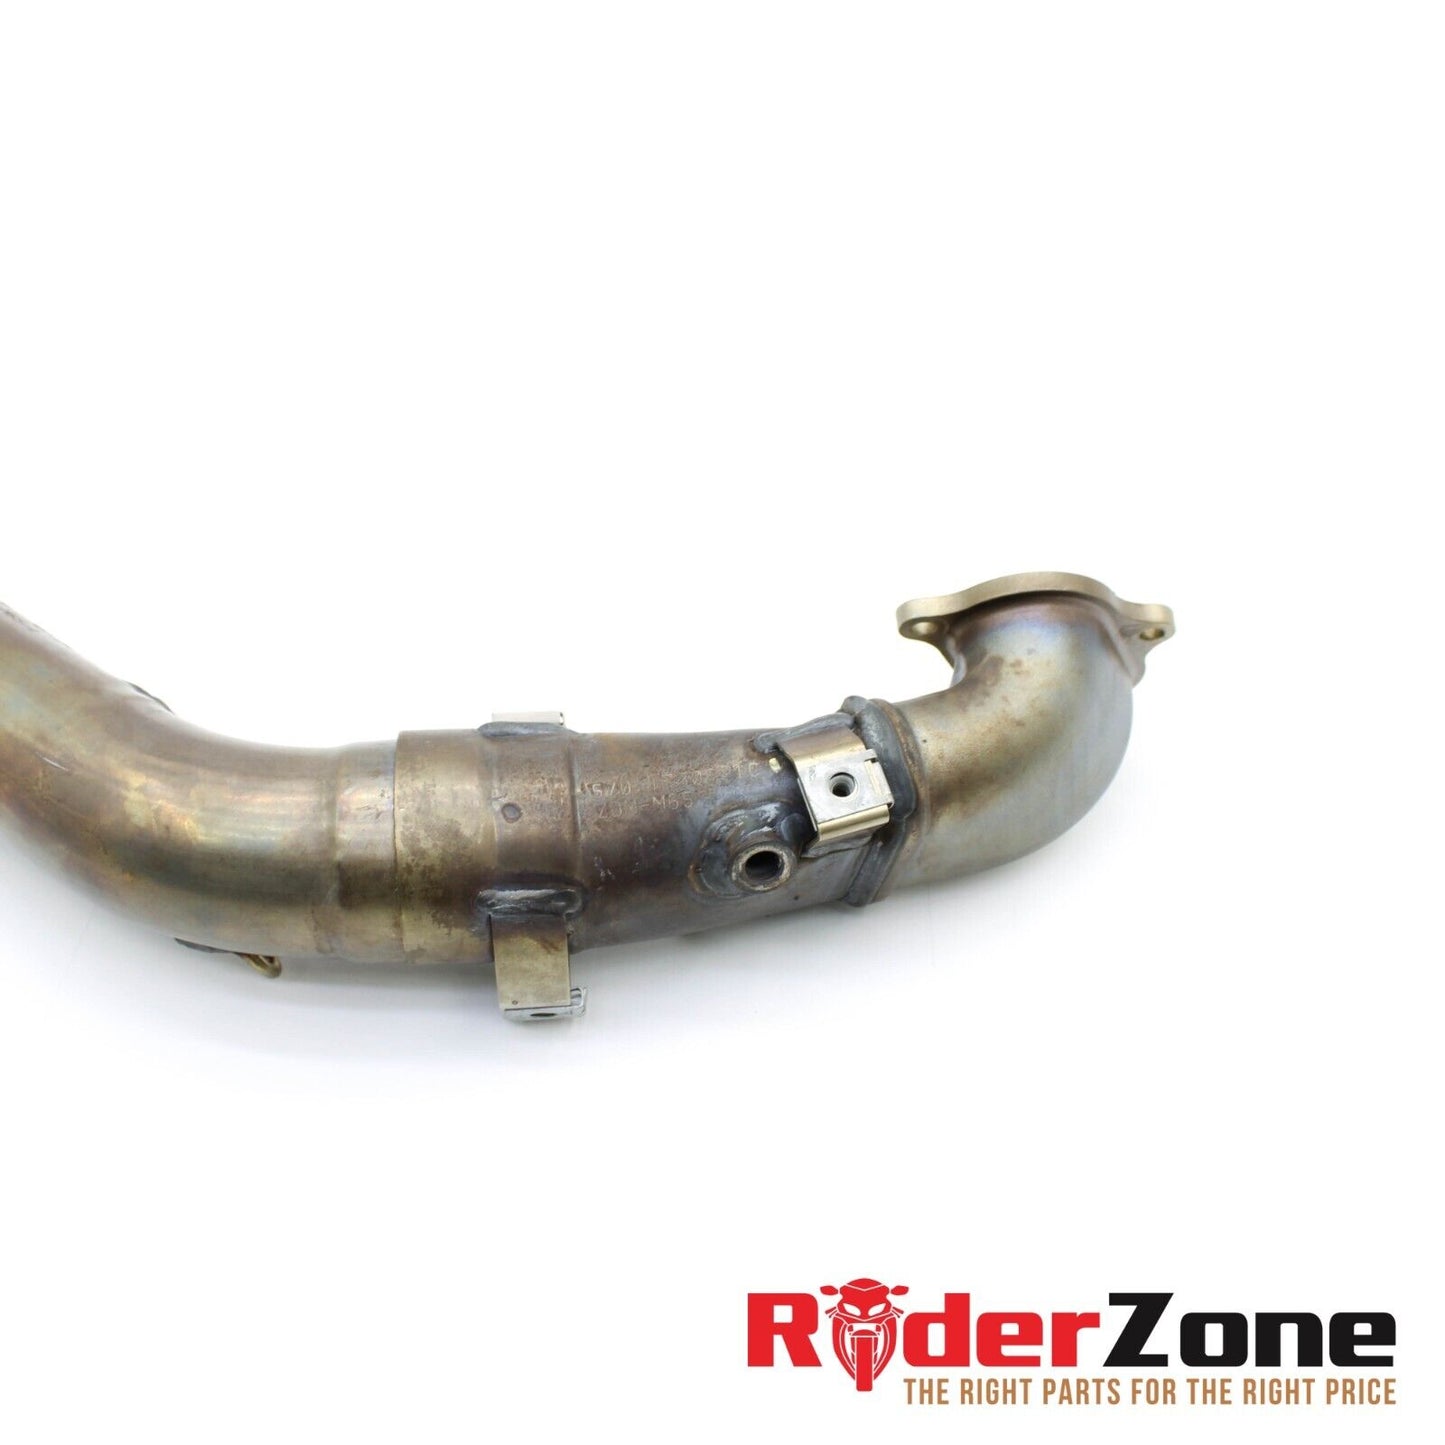 2012 - 2015 DUCATI PANIGALE 1199 EXHAUST FULL SYSTEM HEADERS PIPES COMPLETE OEM